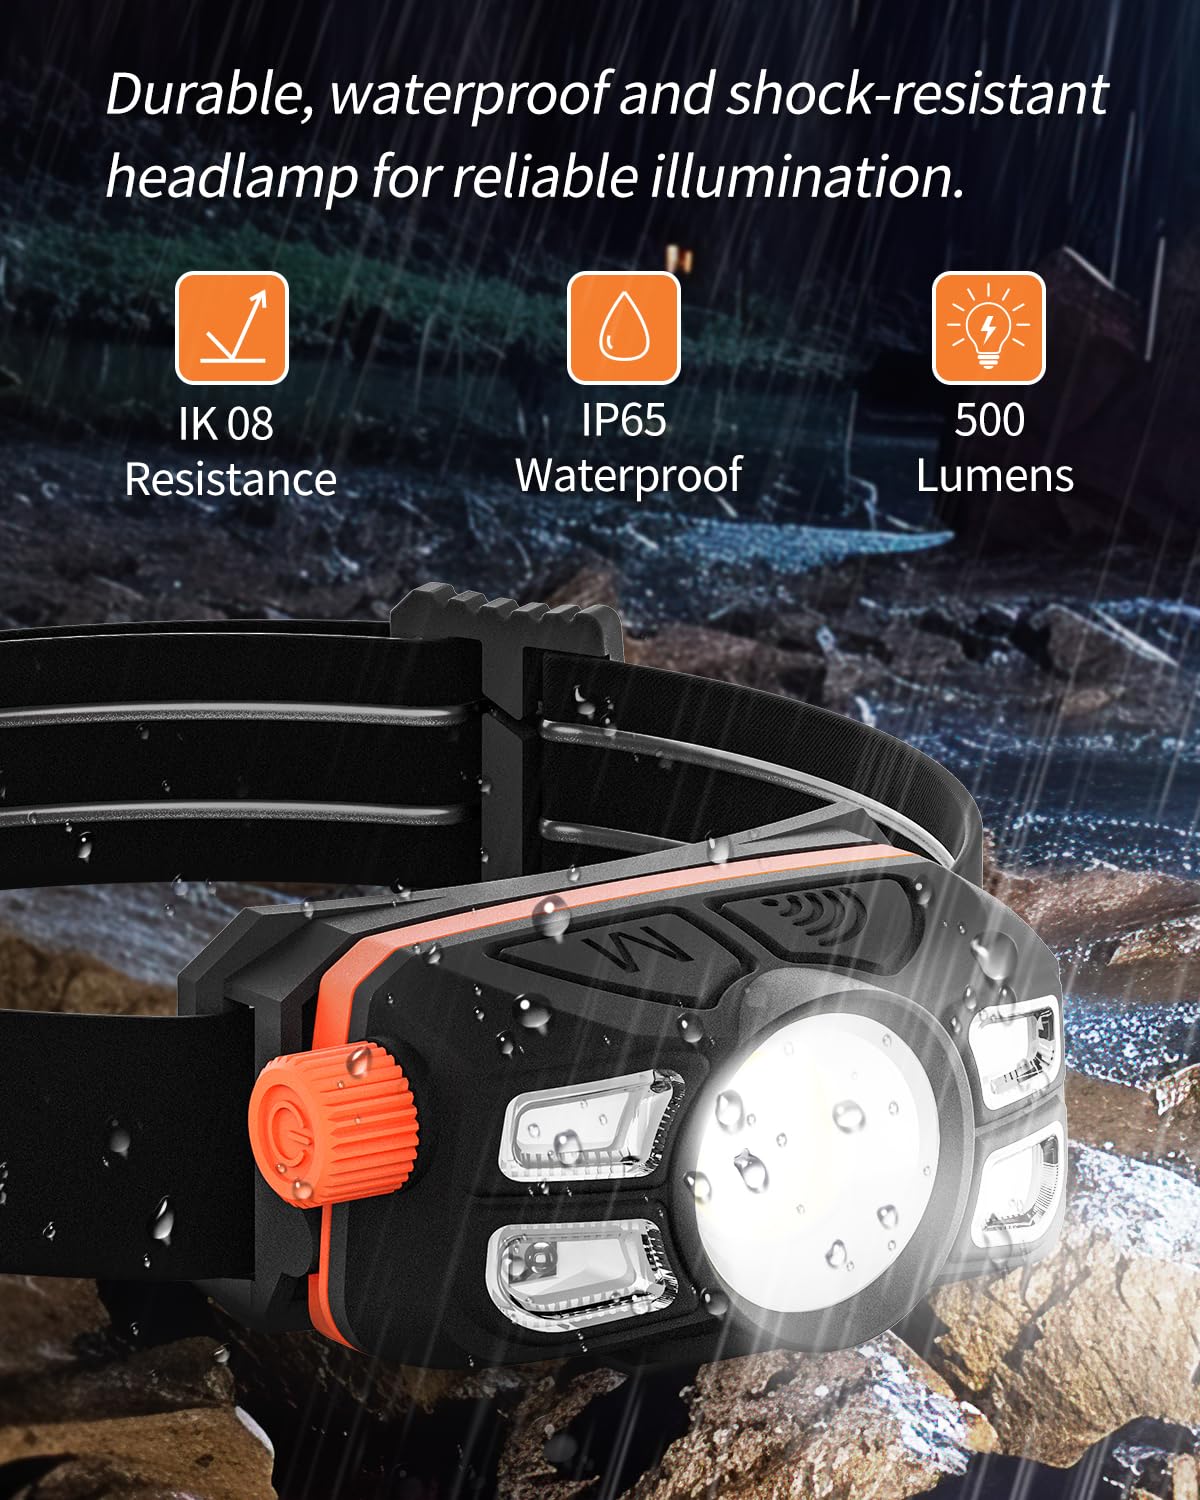 Anylight Rechargeable Headlamp,500 Lumens LED Head Lamp with Stepless Dimming and Motion Sensor, IP65 Waterproof Headlight for Repairing, Running, Camping, Hiking（2 Packs）